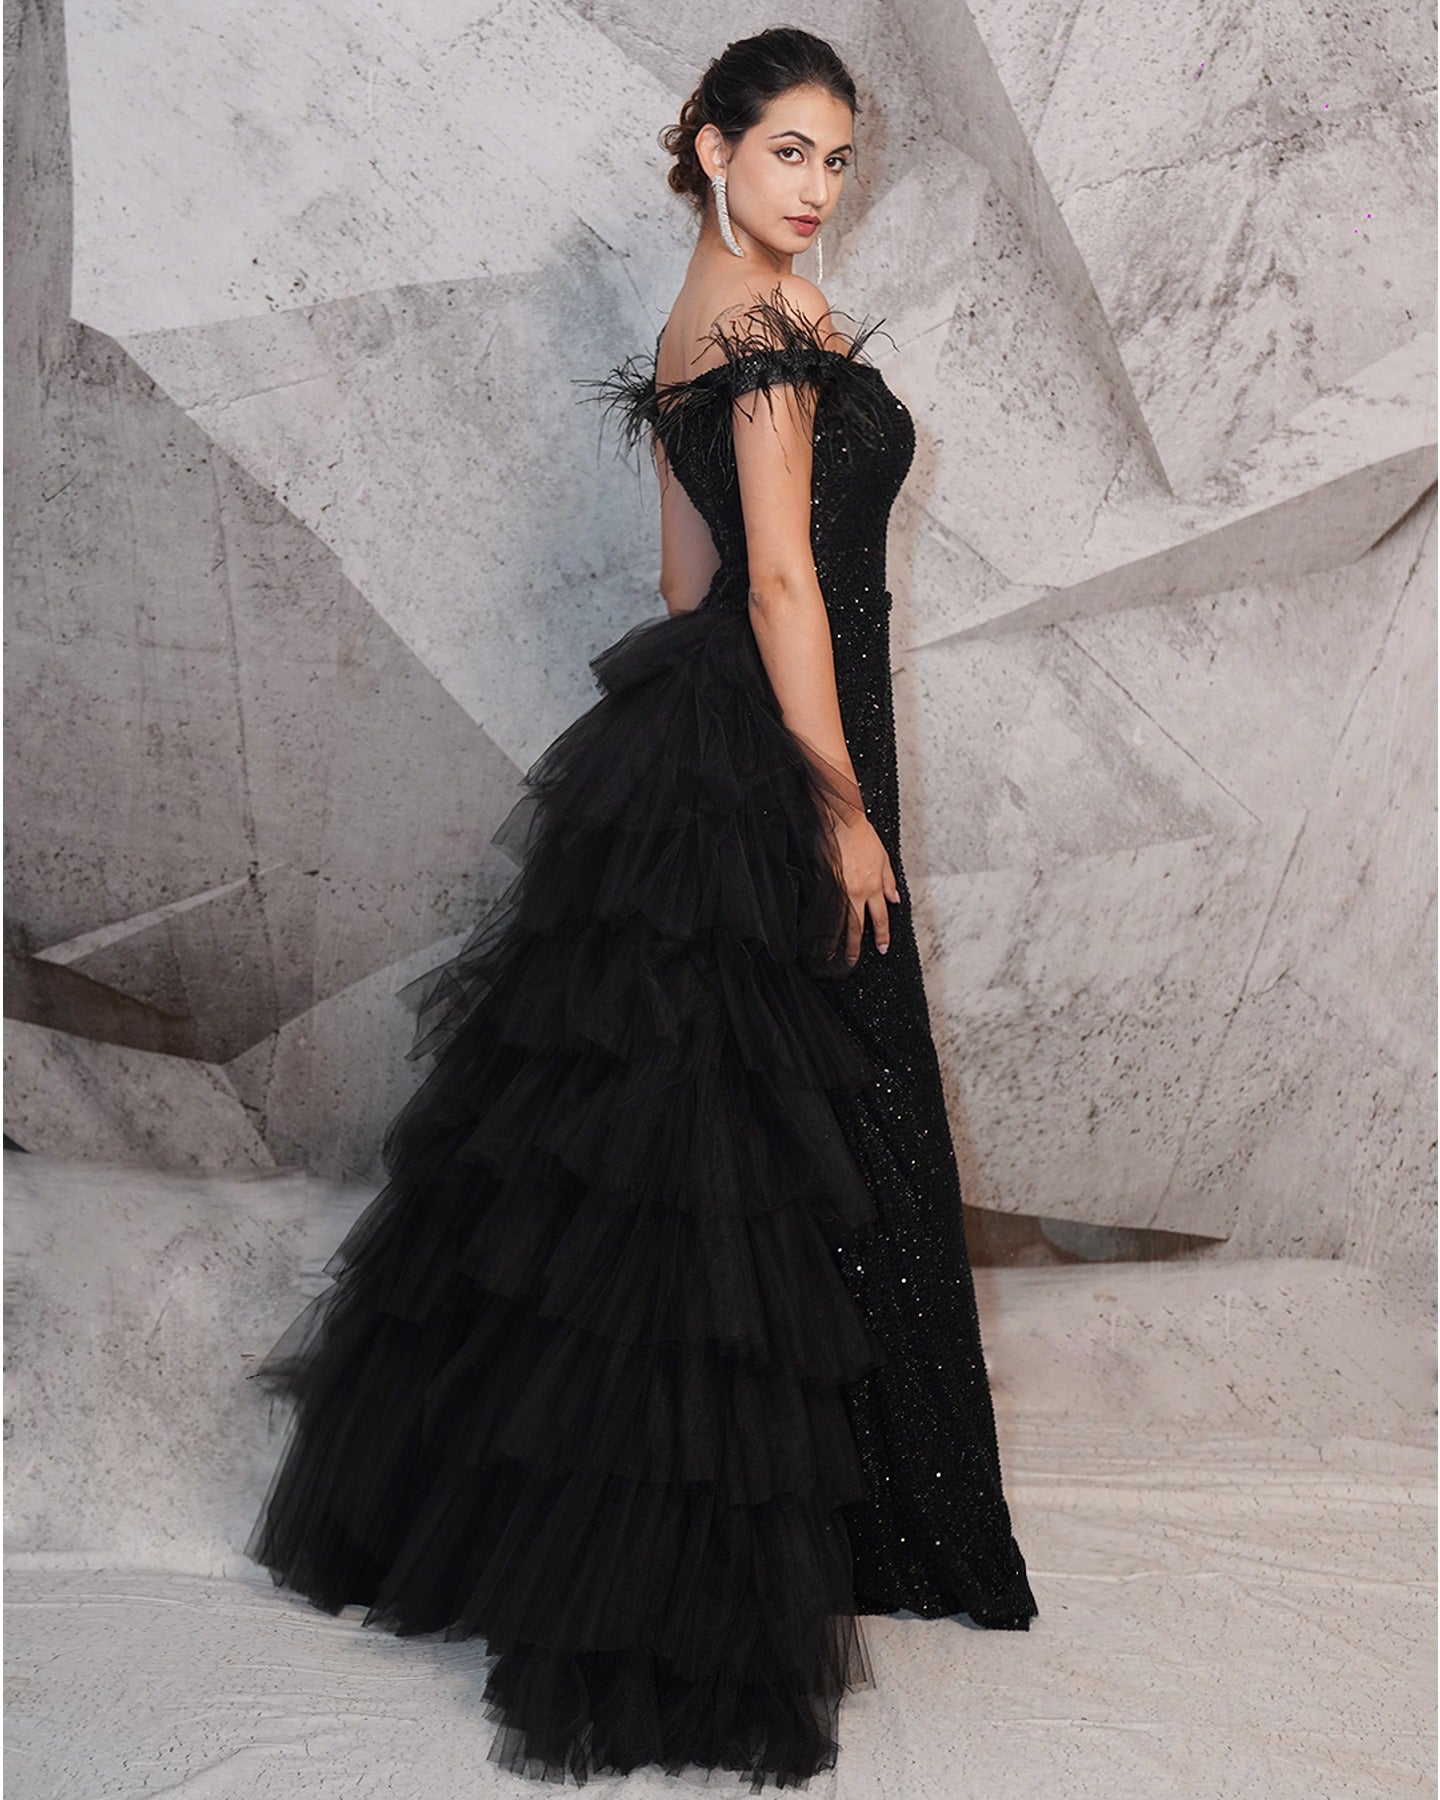 Draped in the mystique of midnight black, this gown is a symphony of sequins, feathers, and intricate embroidery.